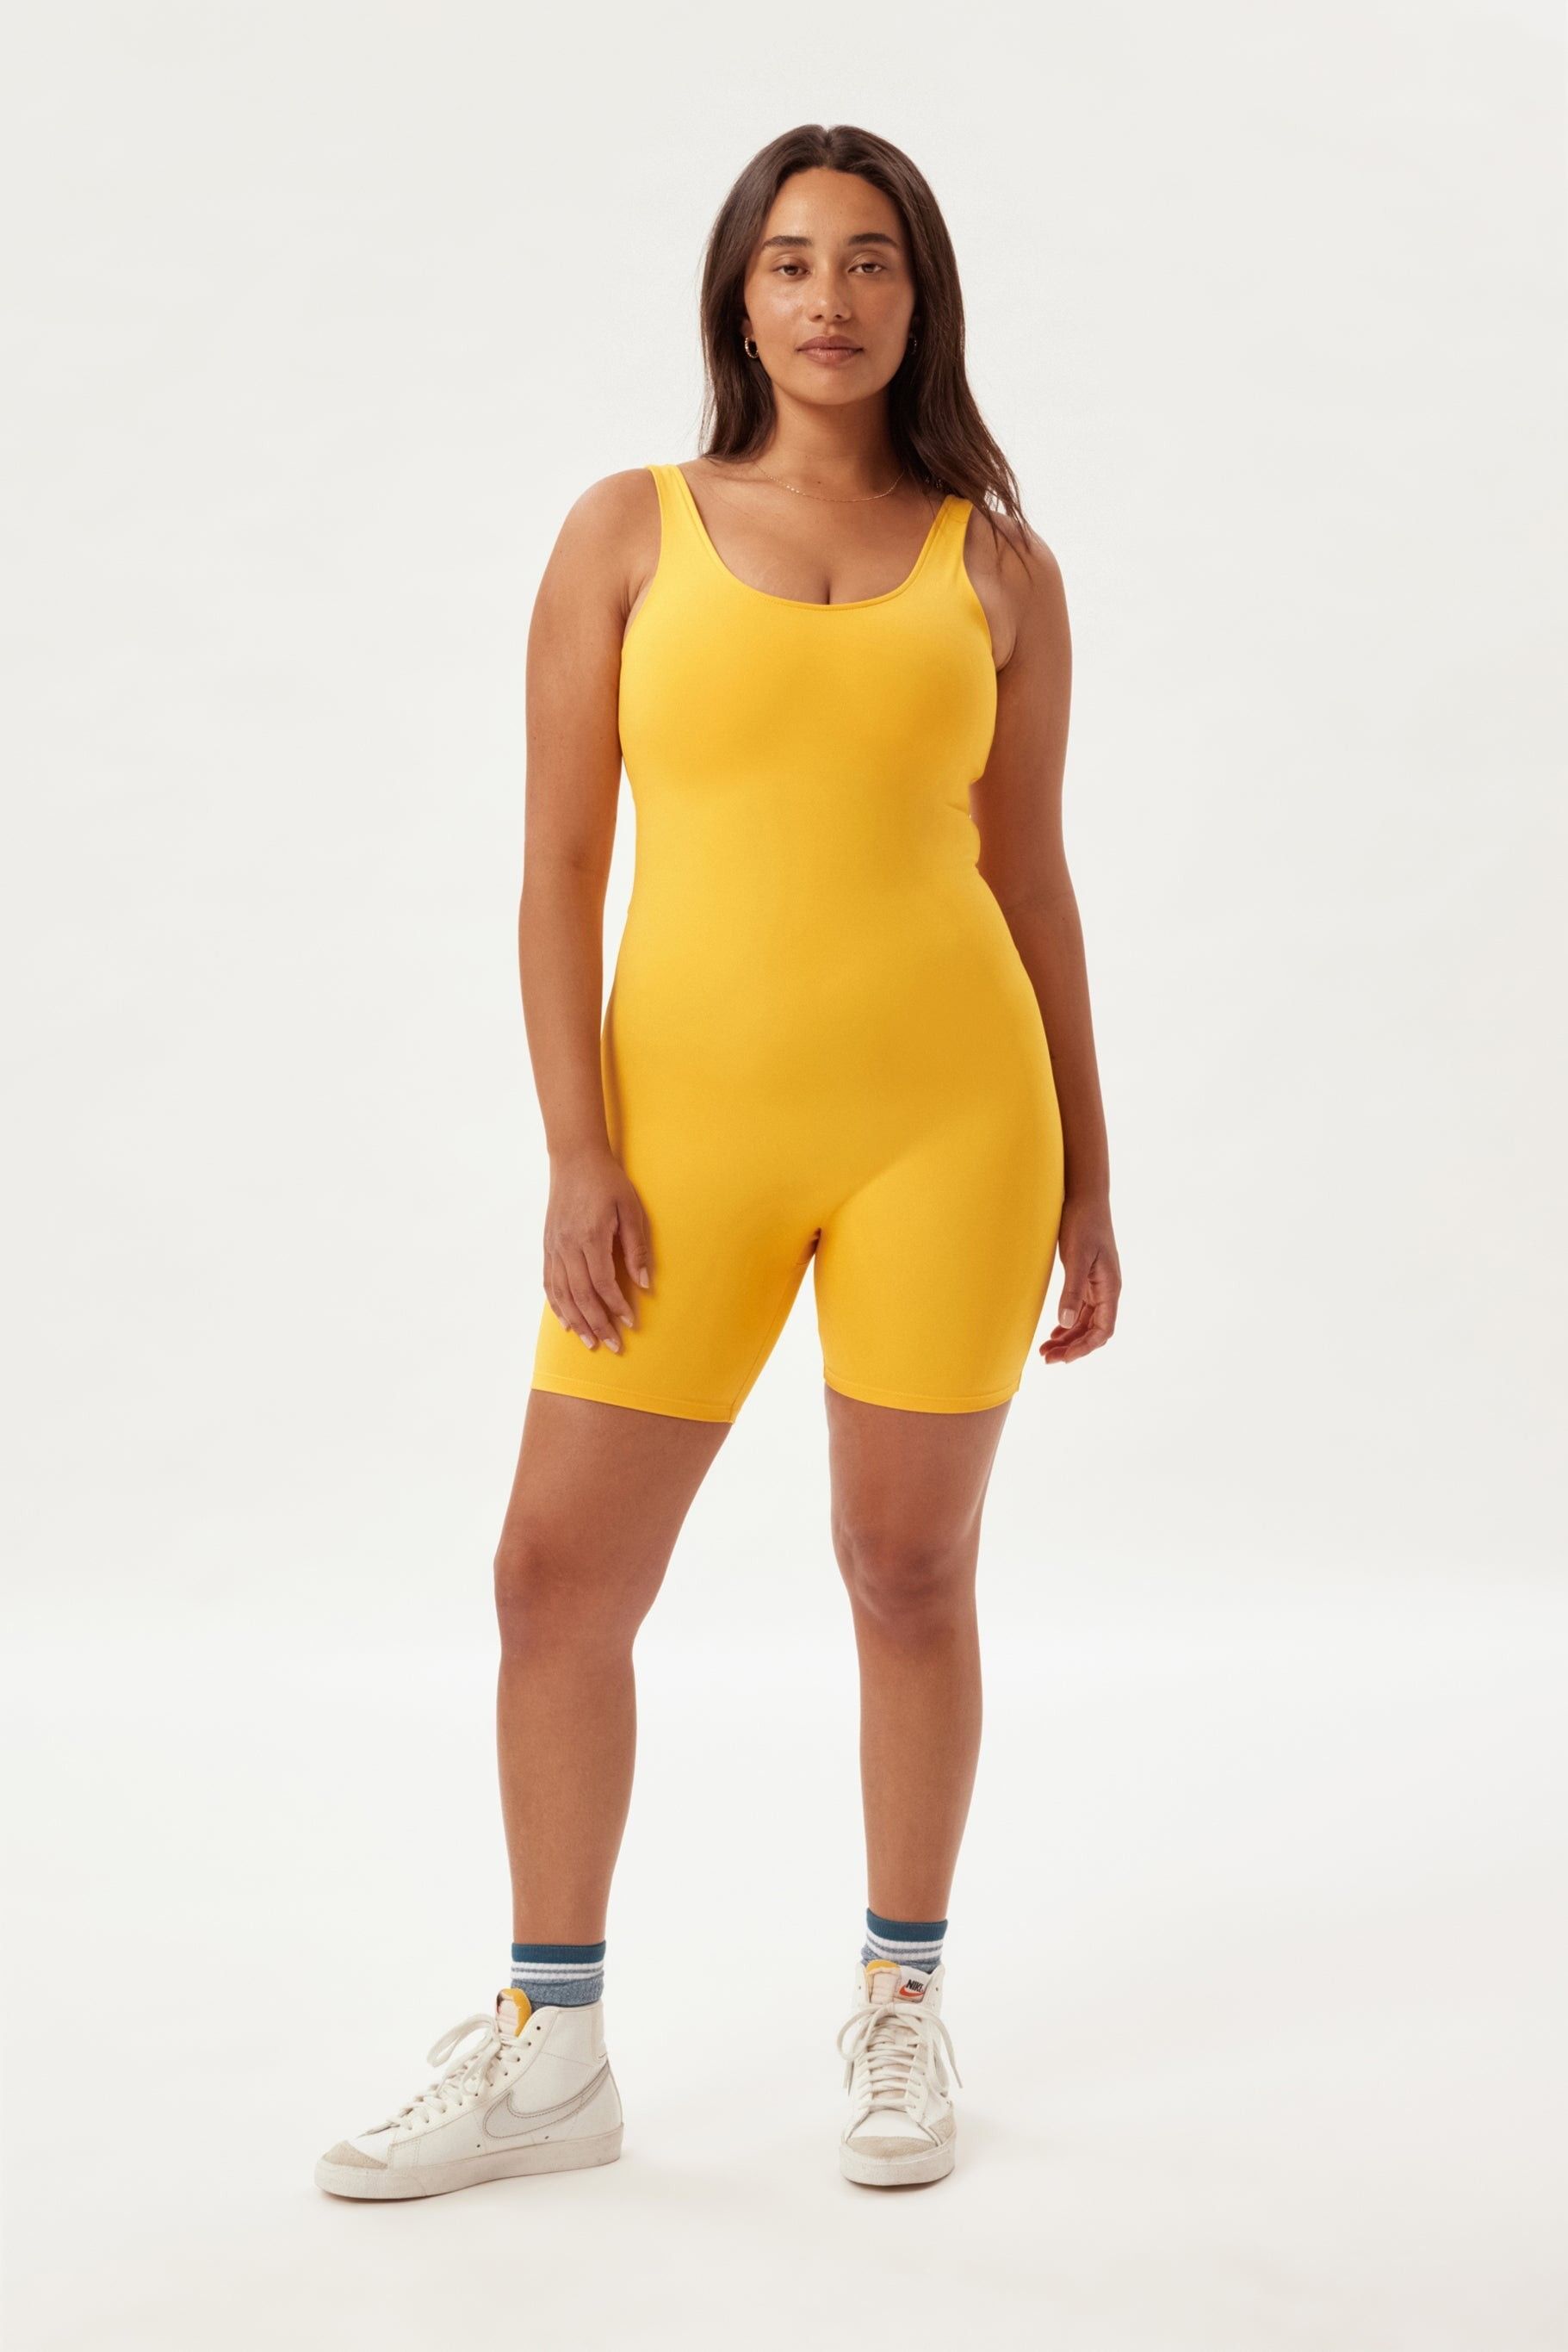 beep bop on X: I need the new @Gymshark yellow set but it's sold out. Help  a girl out. Where can I get it?  / X